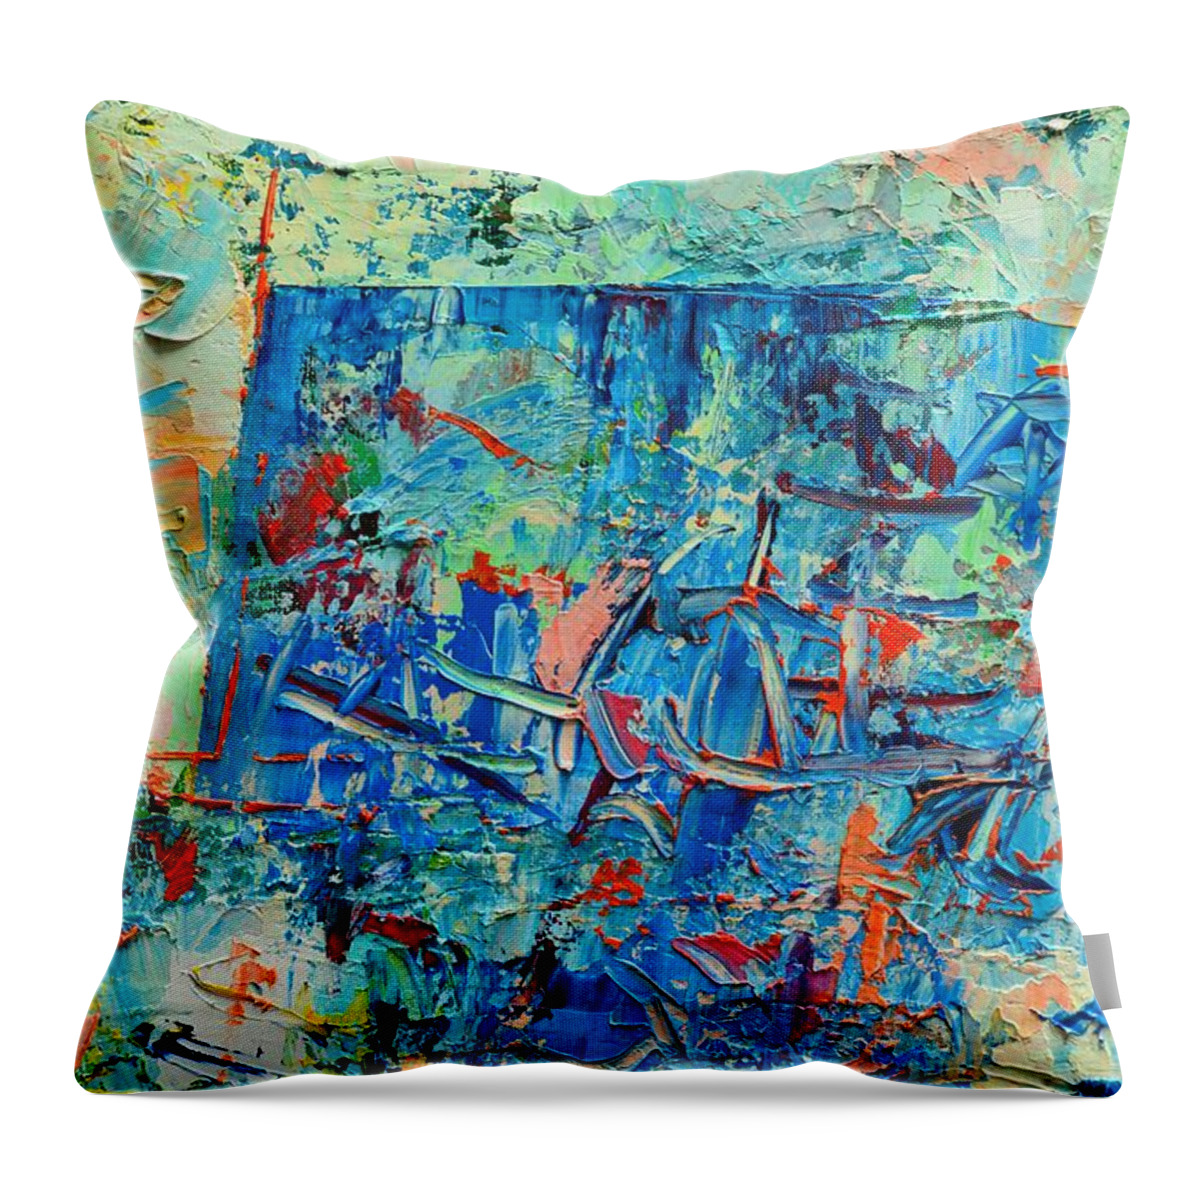 Blue Throw Pillow featuring the painting Blue Play 3 by Ana Maria Edulescu